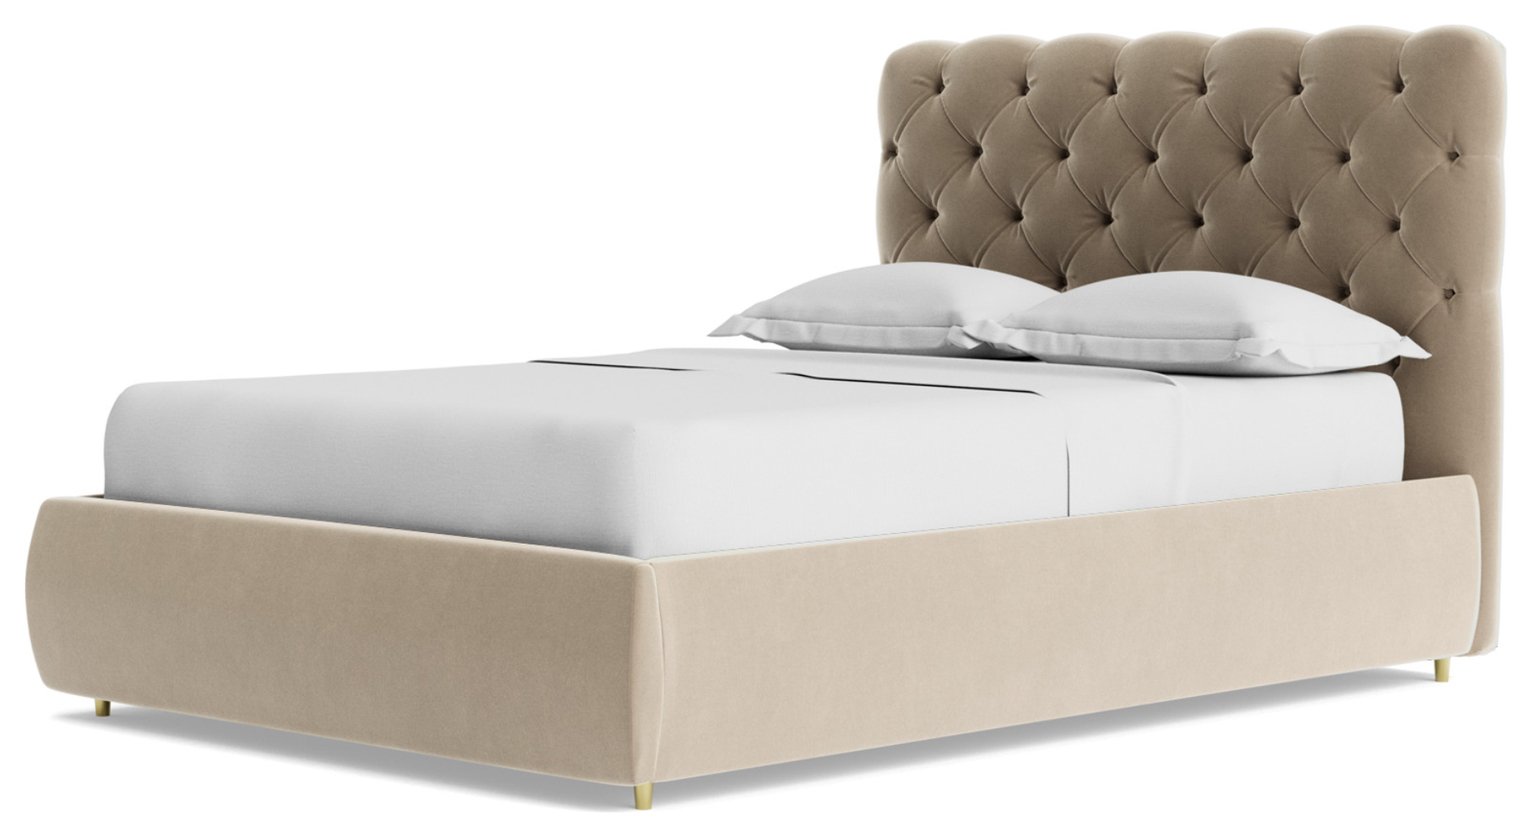 Swoon Burbage Velvet Double Ottoman Bedframe - Taupe